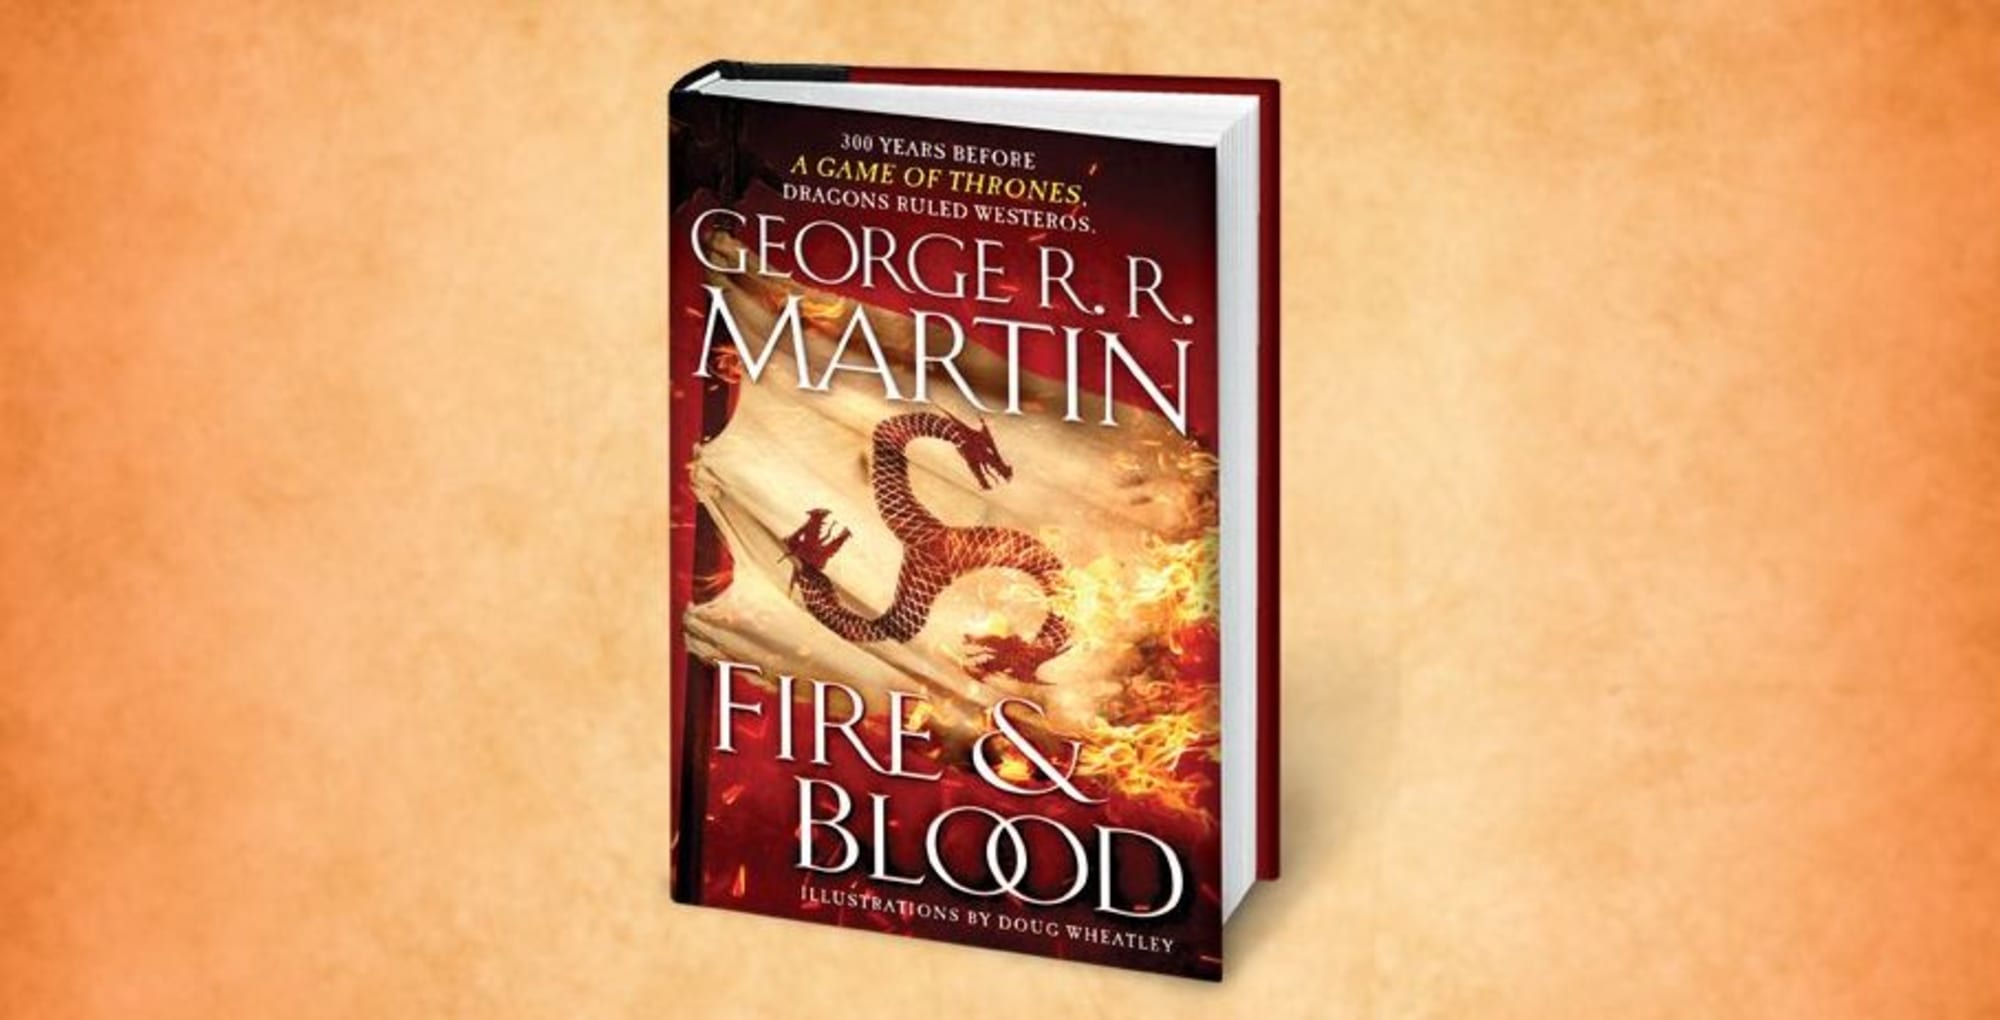 a song of fire and blood